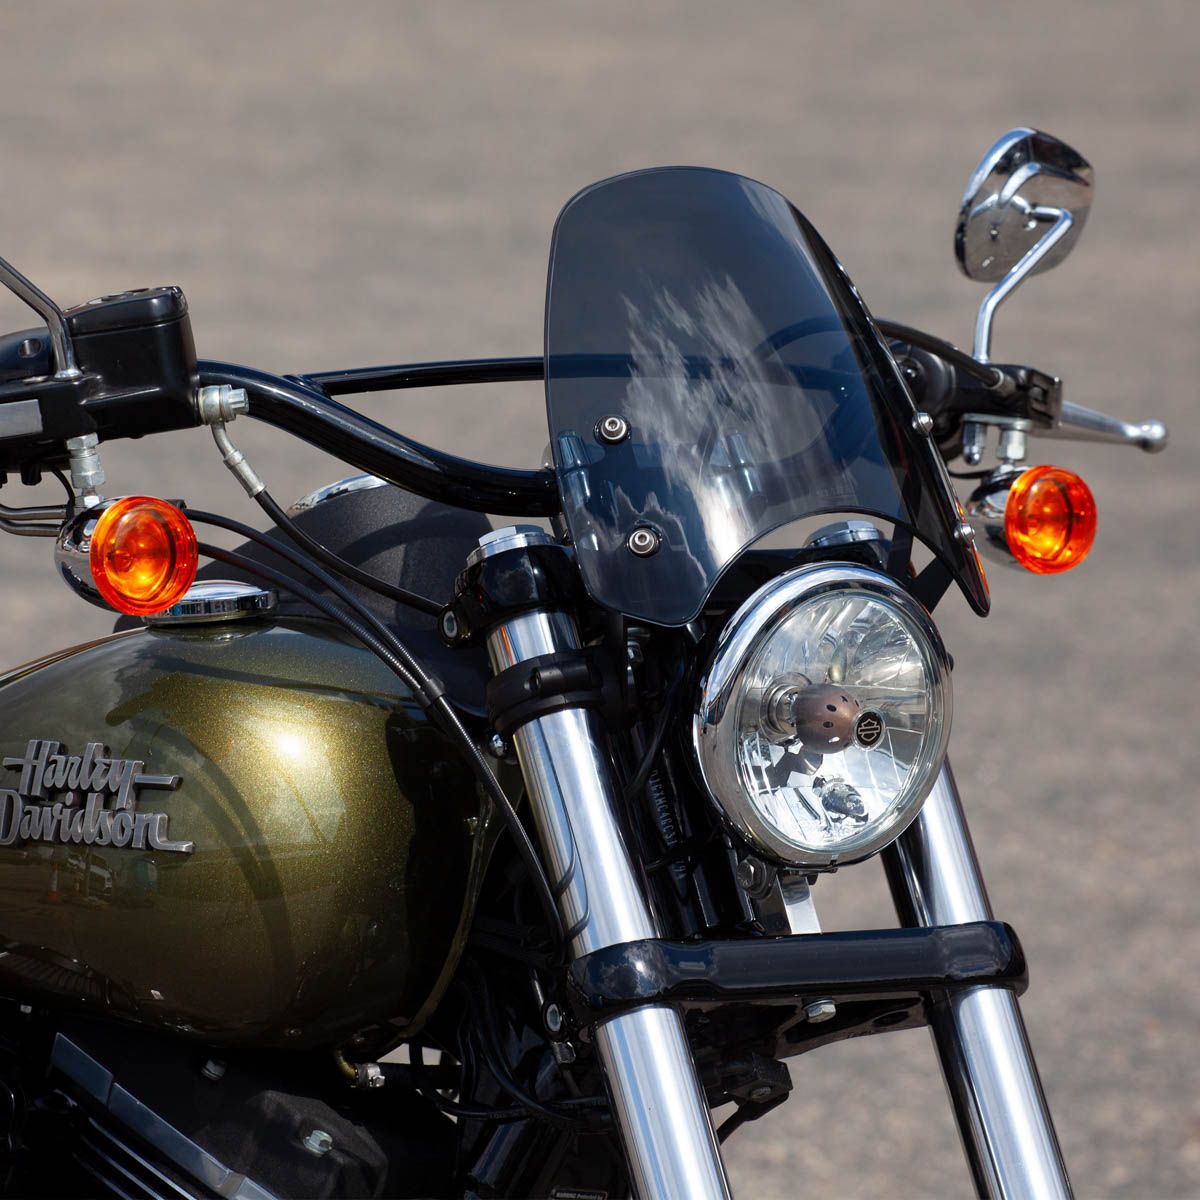 Dart Flyscreens - The Original Small Motorcycle Windshield